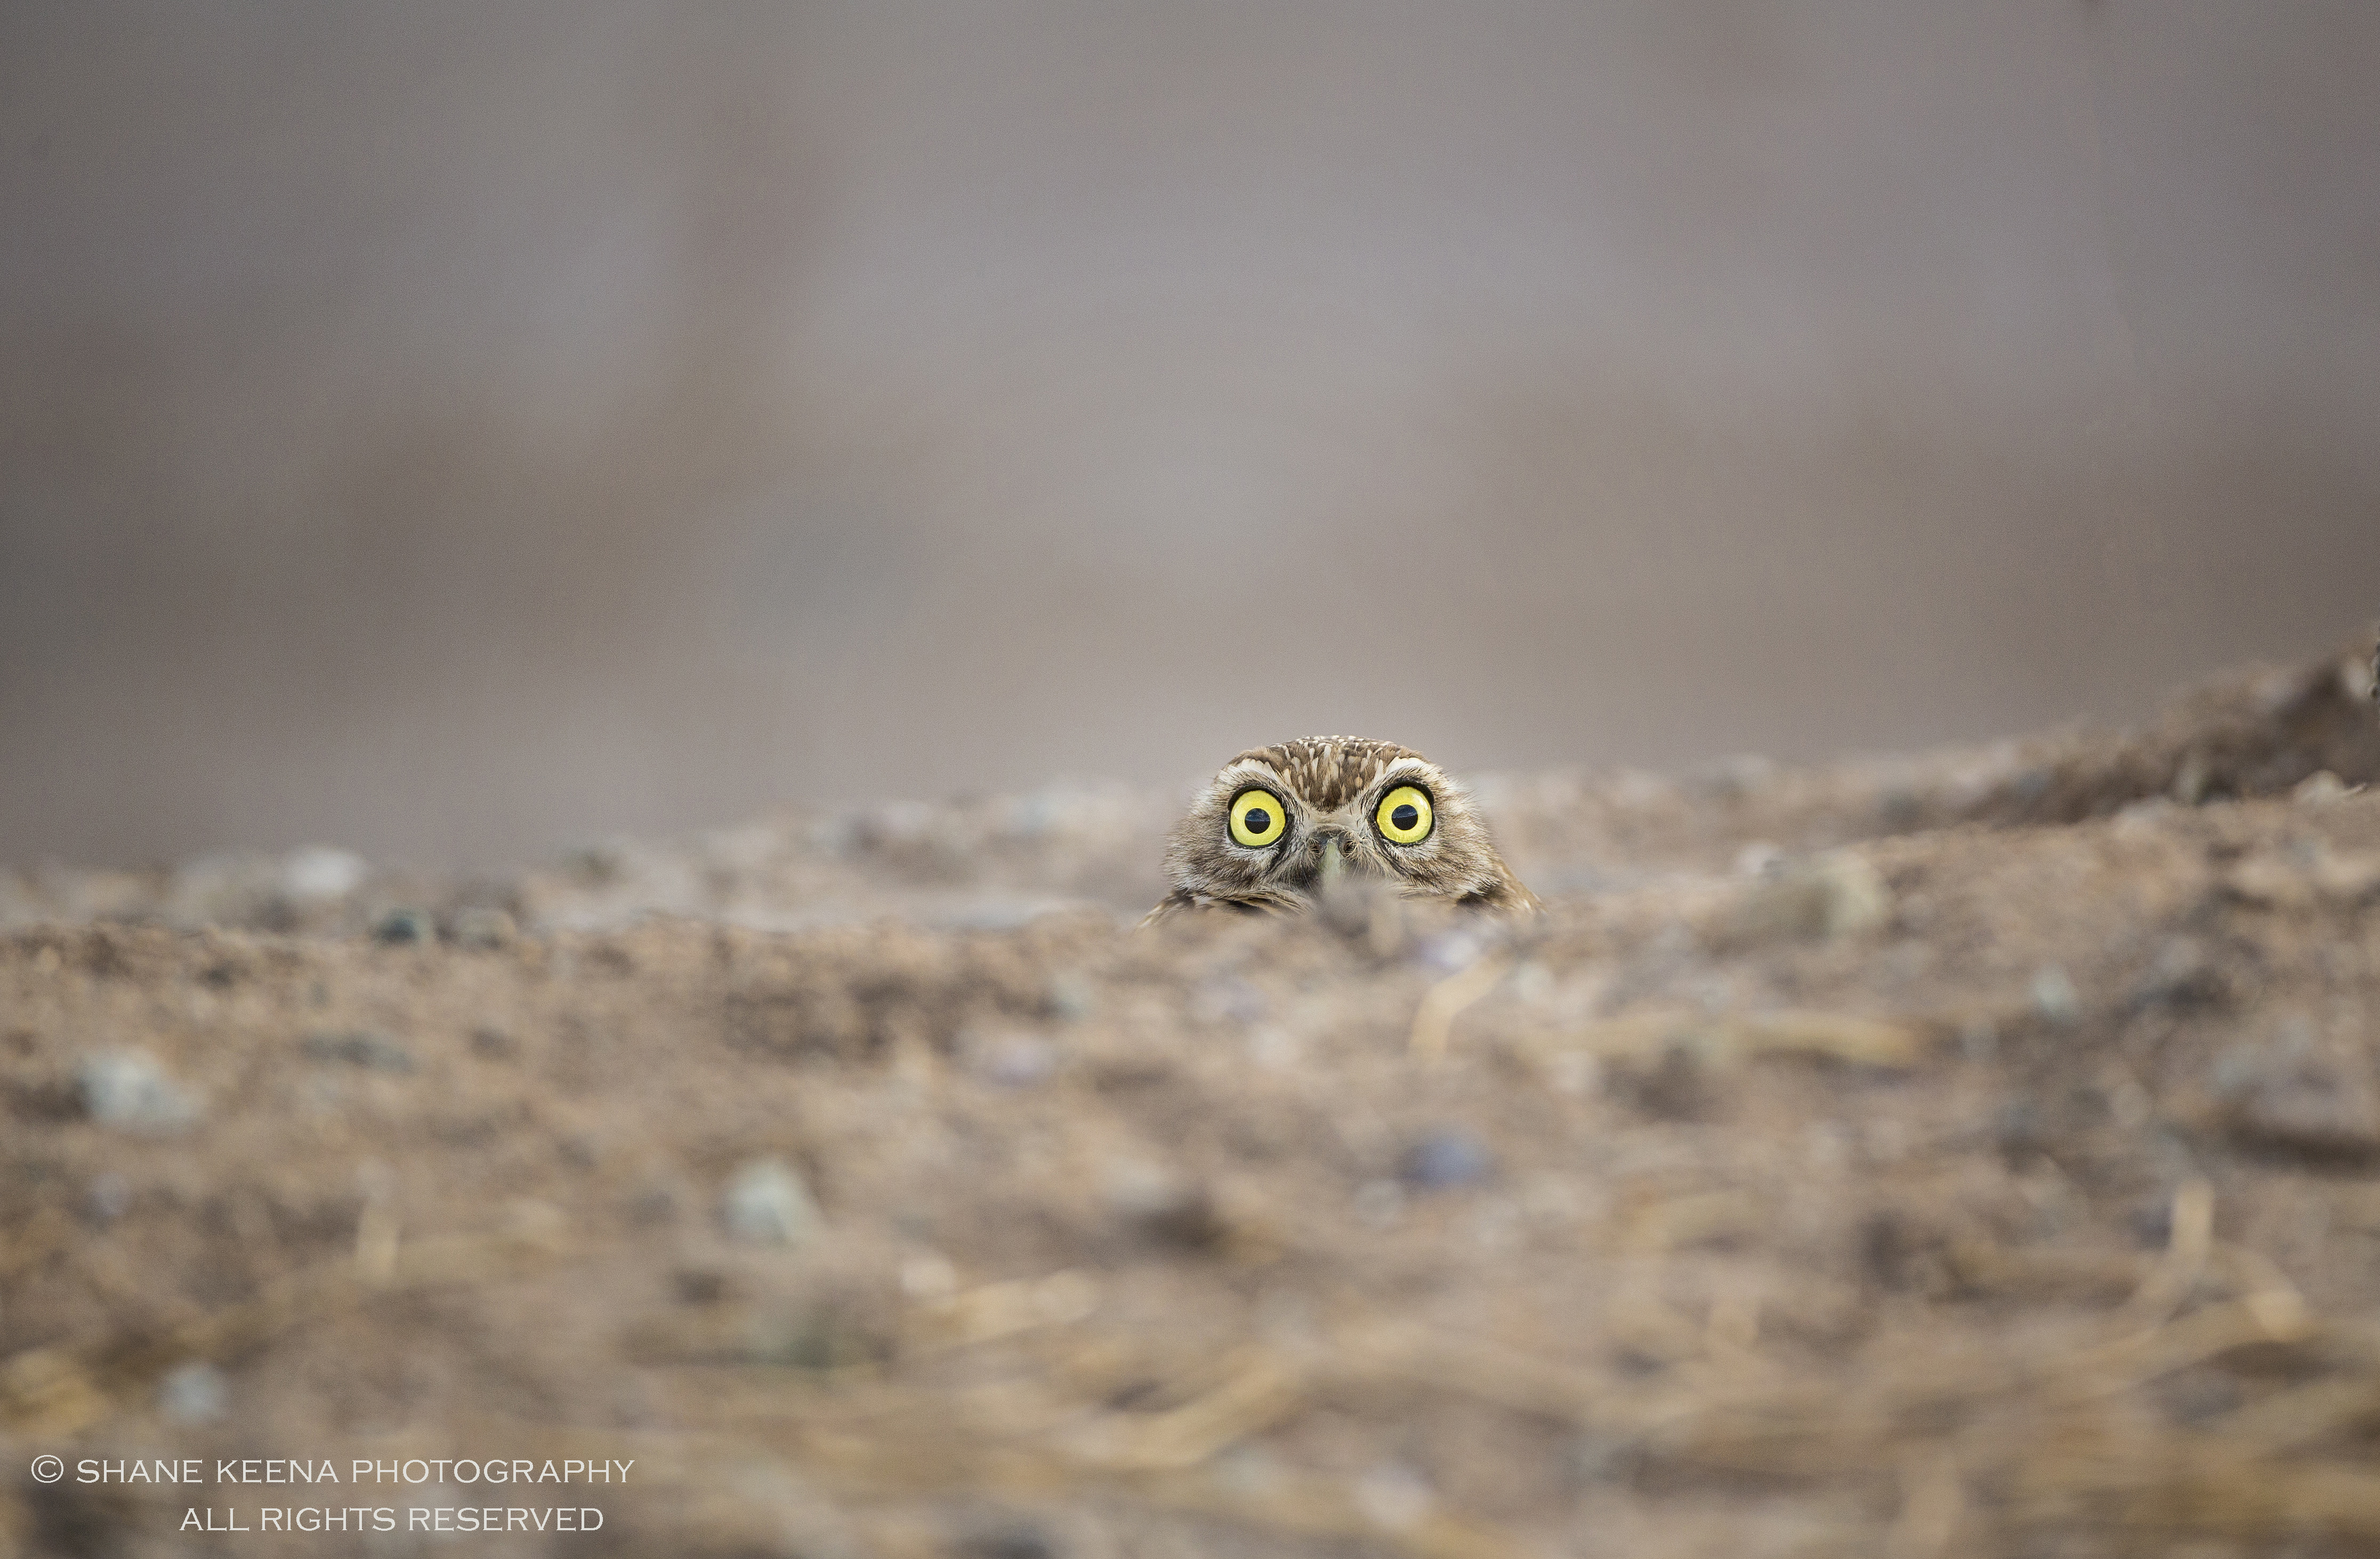 Peek-a-boo
I've visited this particular burrowing owl many times. Always the same burrow and always the same expression!
...